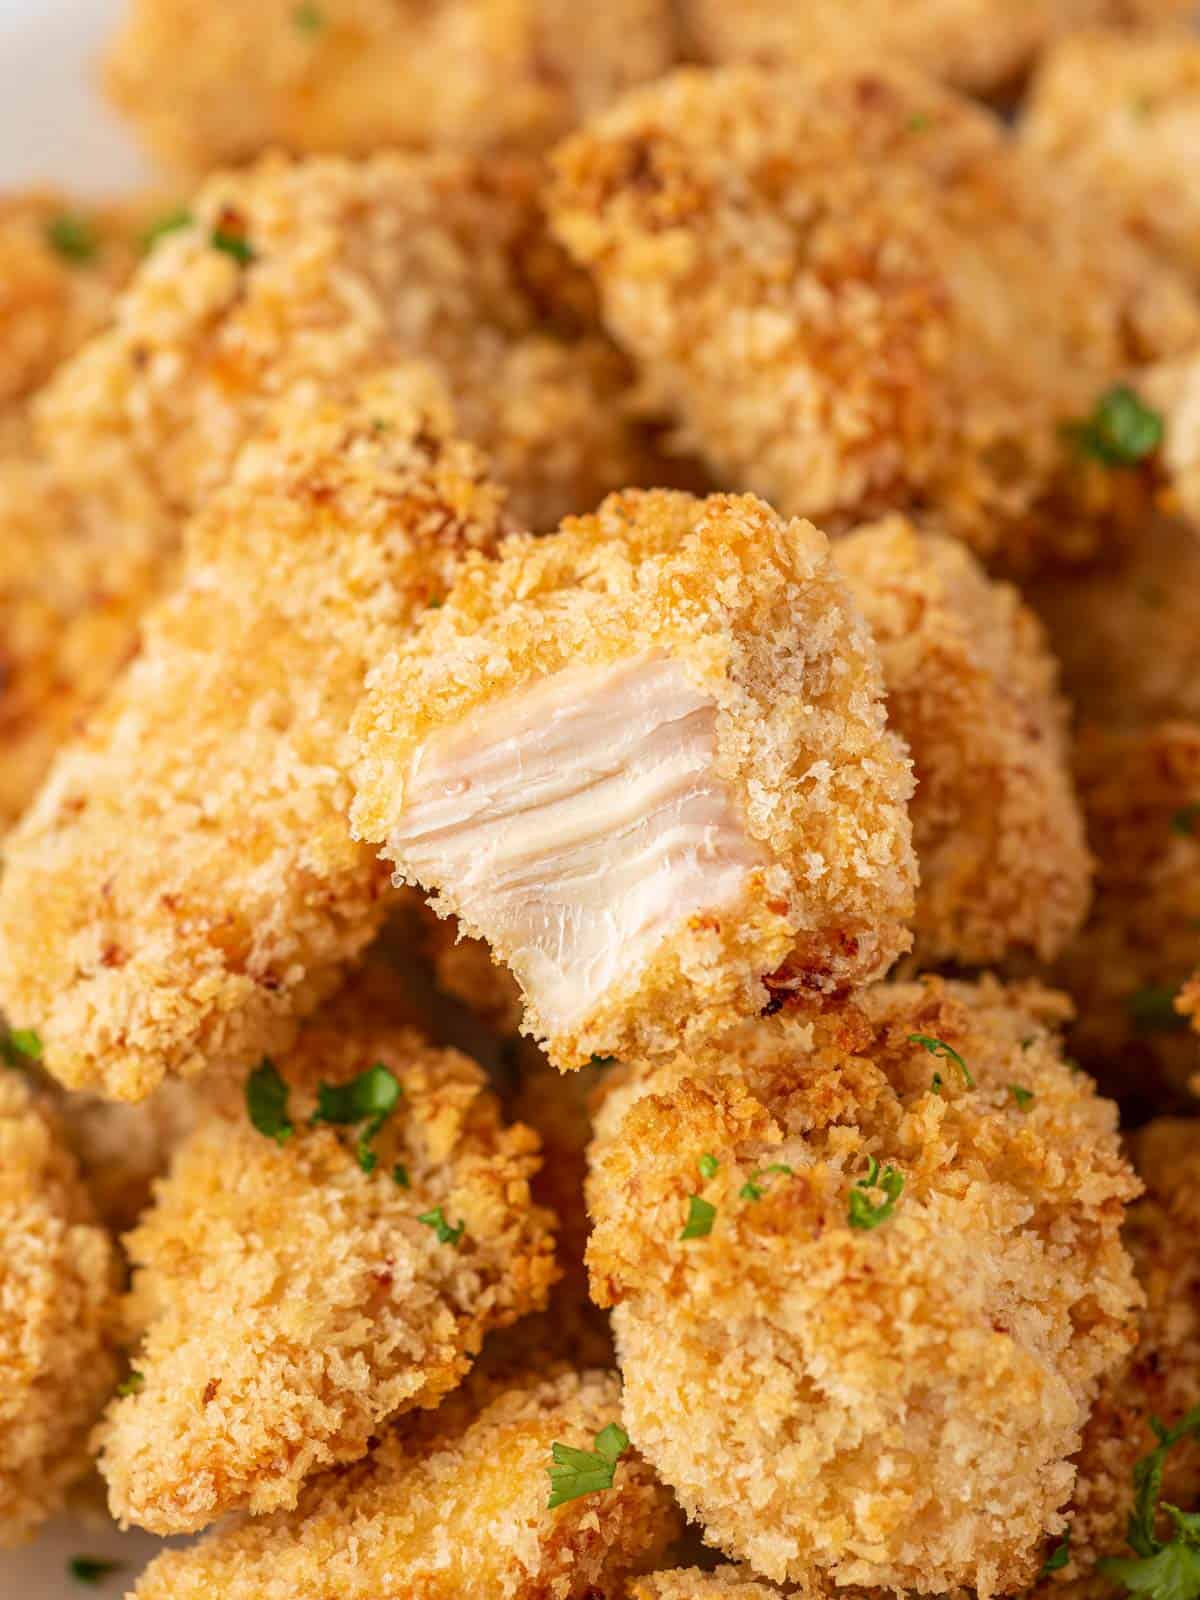 A pile of popcorn chicken with a bite taken out of one.